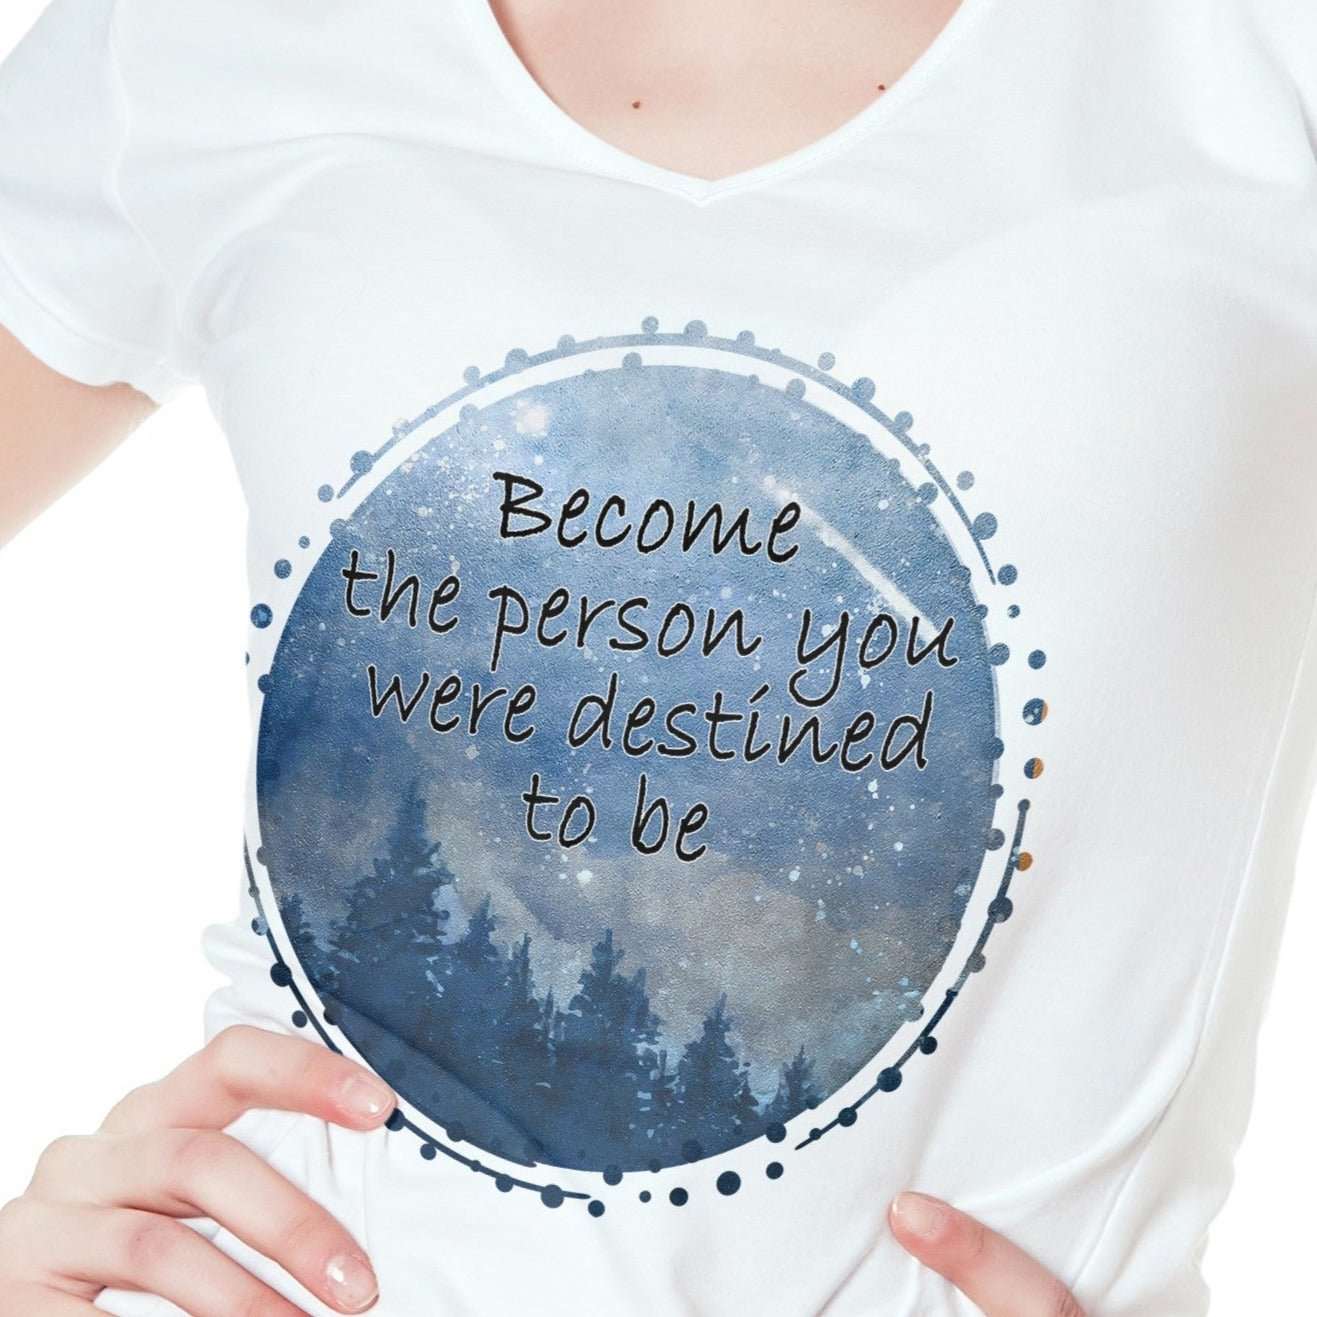 Become the person you were destined to be